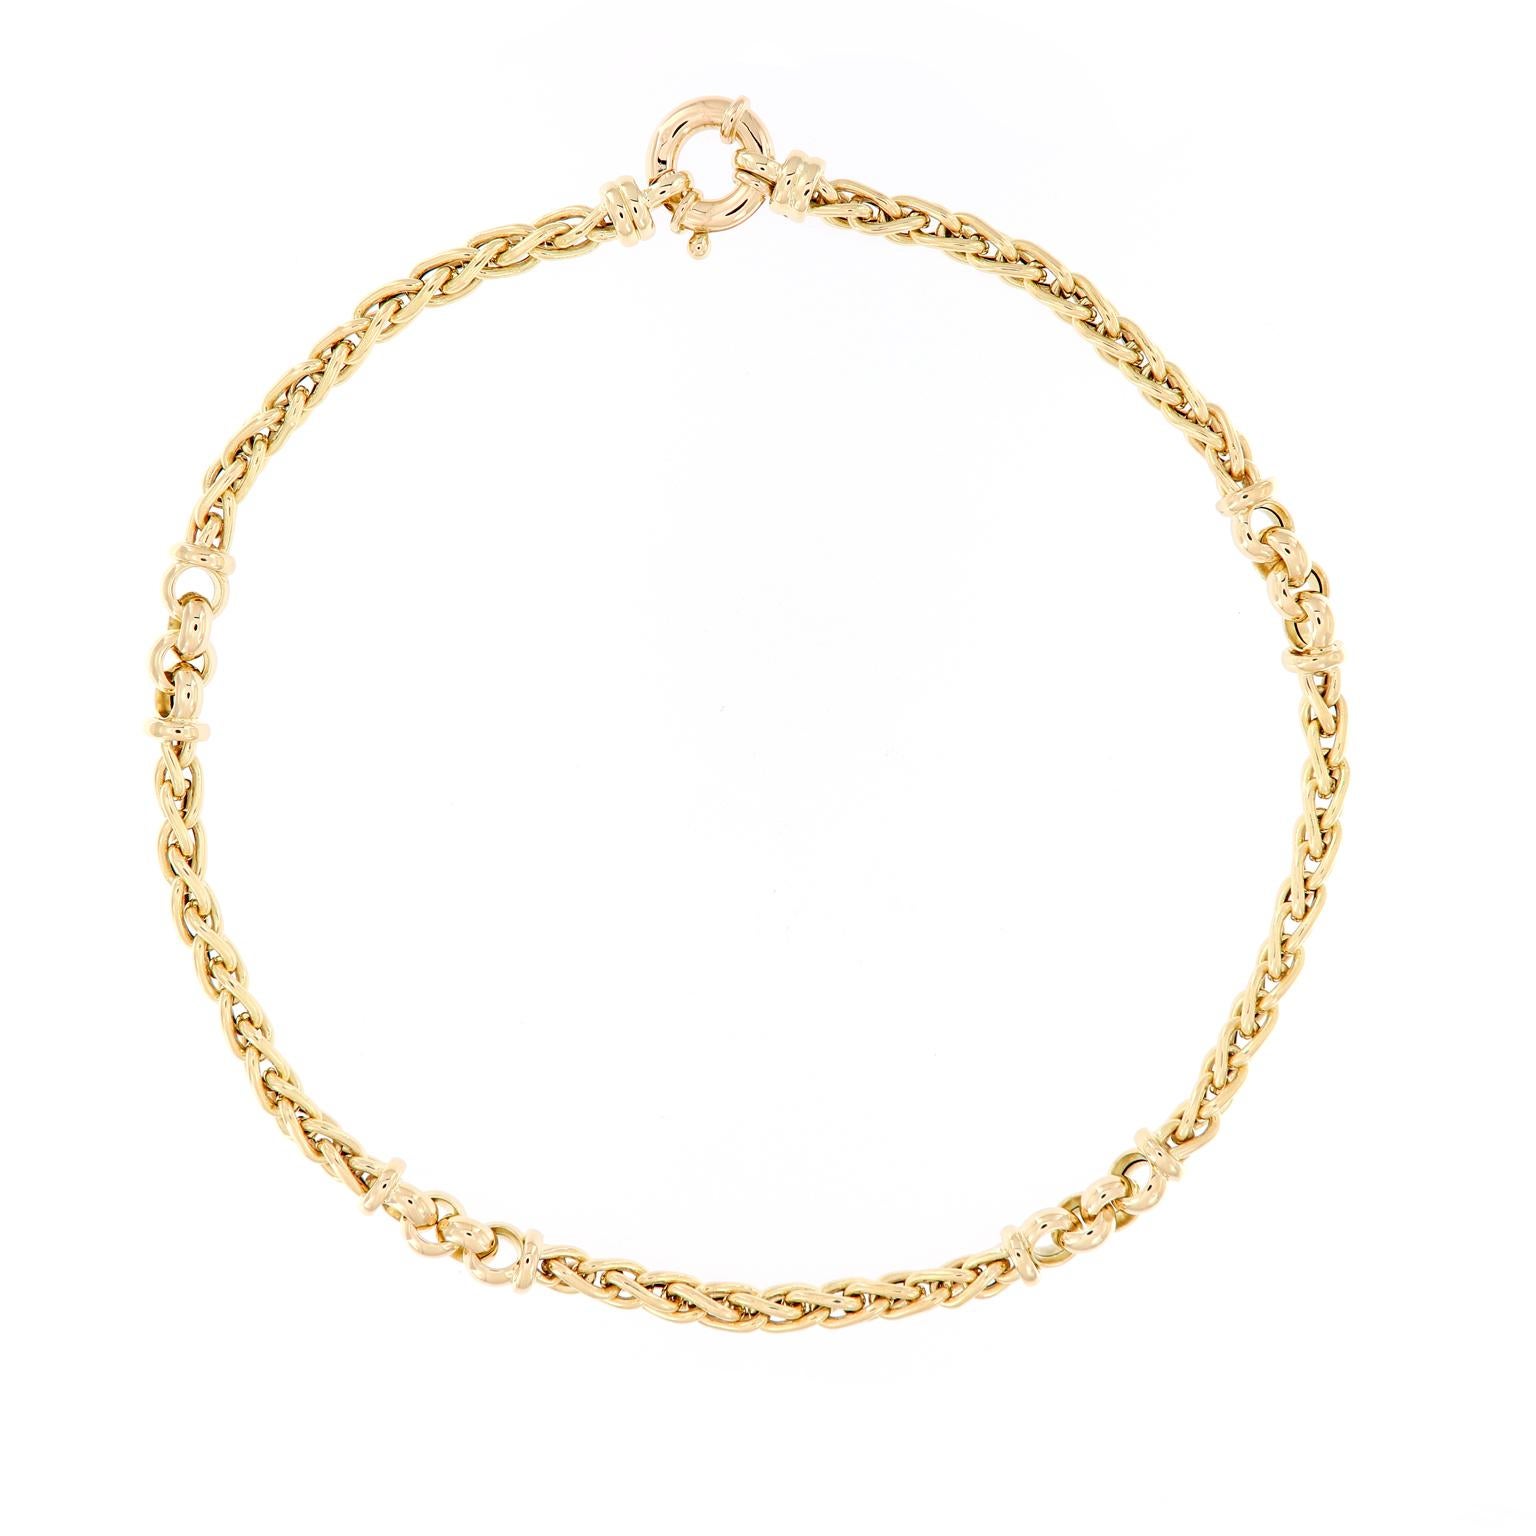 This beautiful Italian 14 karat yellow necklace features five woven gold link sections connected with larger round gold links. The necklace is 18 inches long and 5-8 mm wide. . 